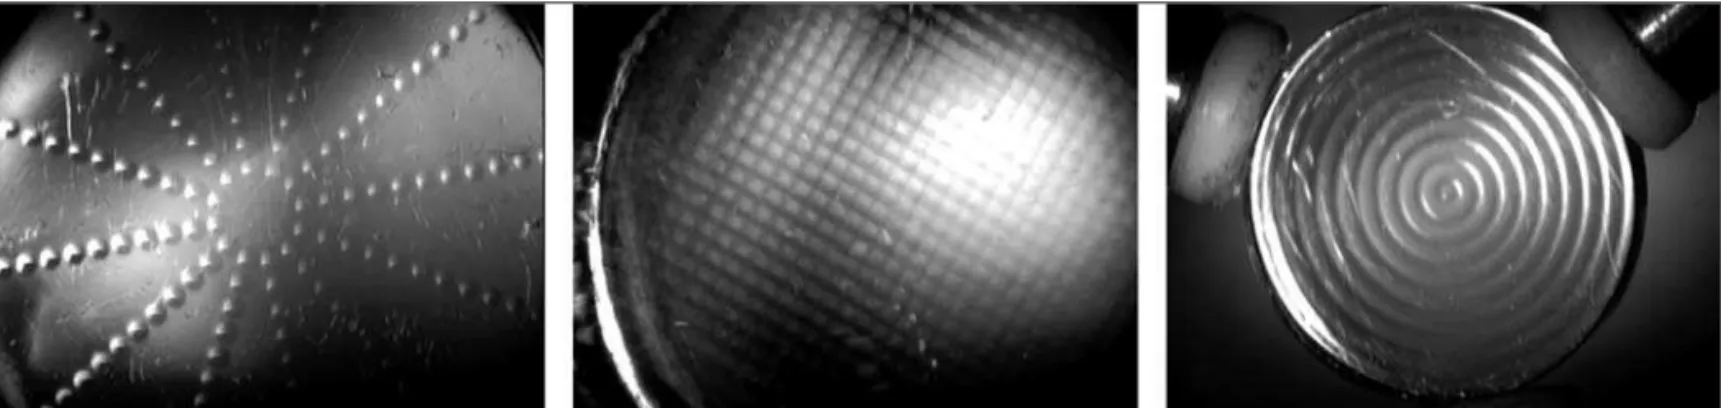 Figure 2 - Magnified digital photographs acquired on a Zeiss slit-lamp of the DOD sensor (left), the HS sensor (center), and the CYL sensor (right).